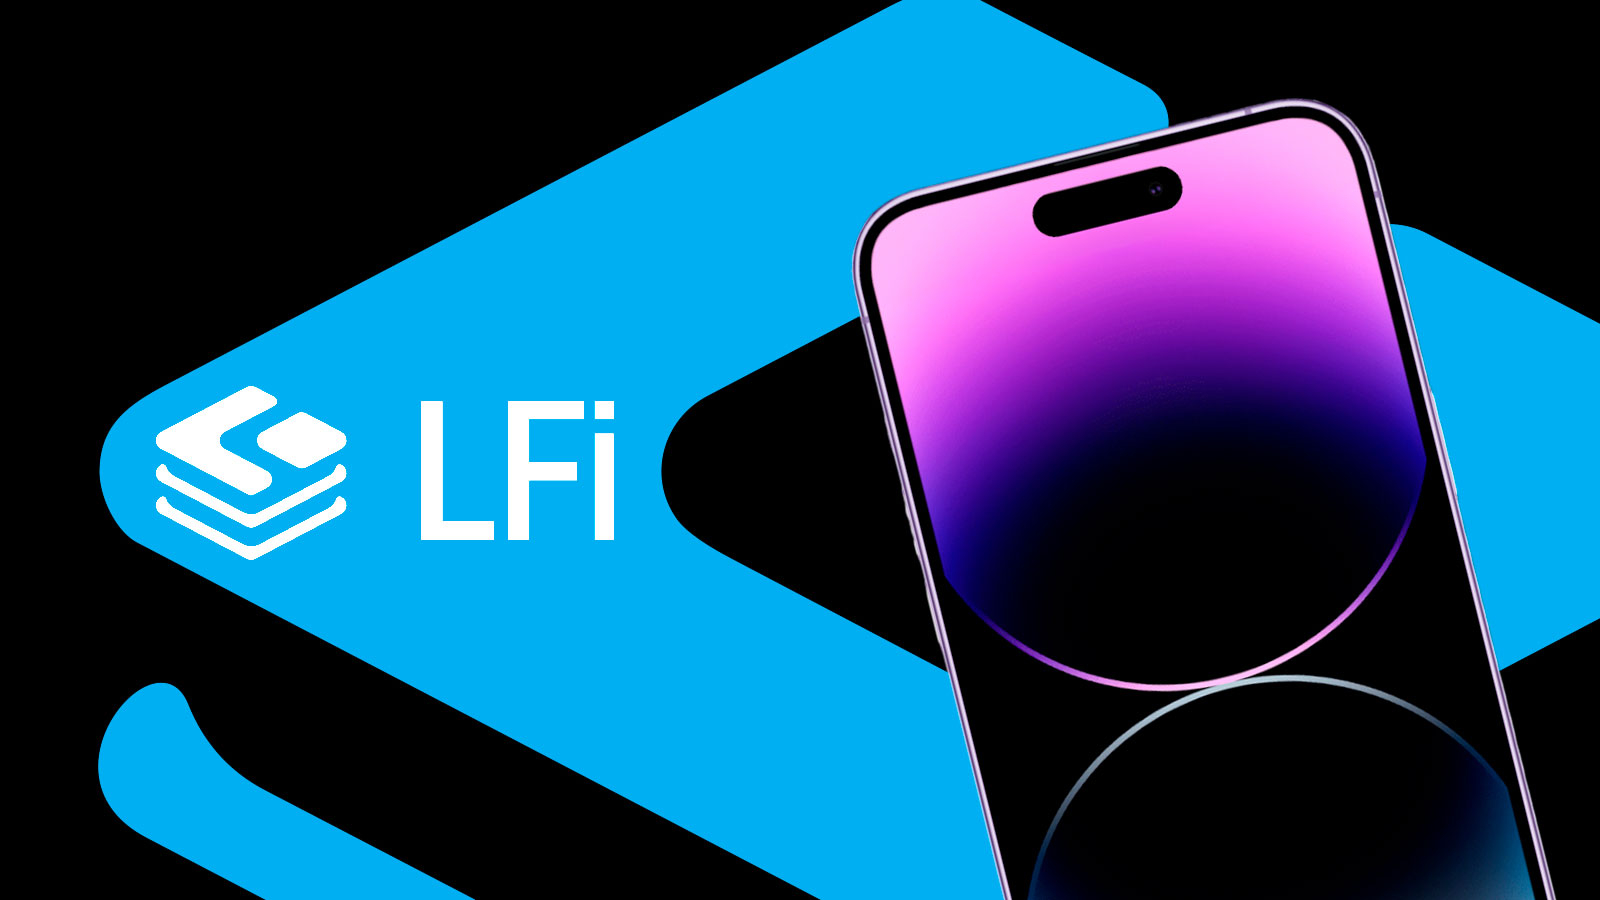 5 Reasons Why The LFi One Smartphone Stands Out from the Crowd